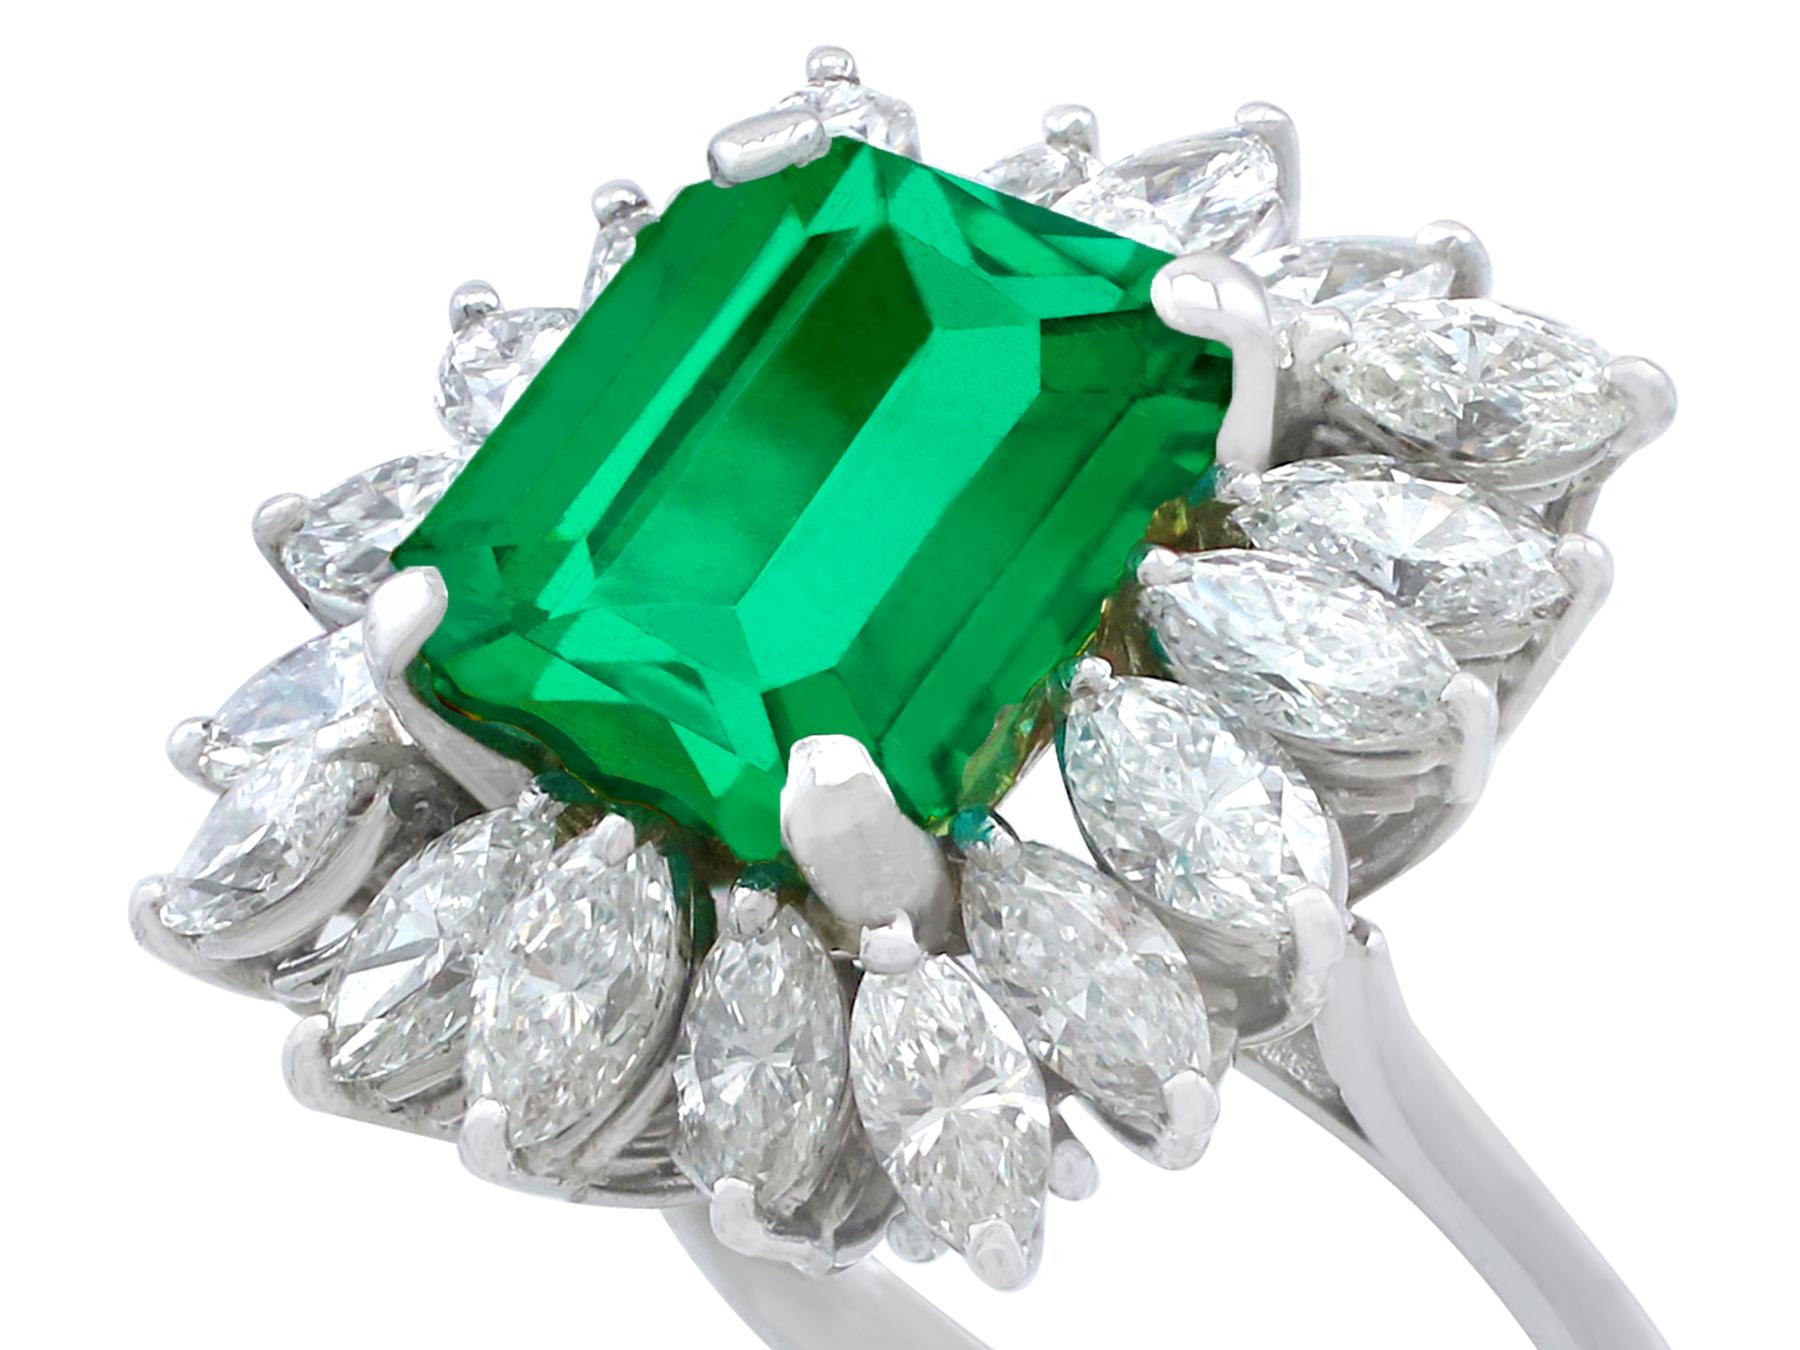 Vintage 4.30 Carat Emerald and 3.24 Carat Diamond White Gold Cluster Ring In Excellent Condition For Sale In Jesmond, Newcastle Upon Tyne